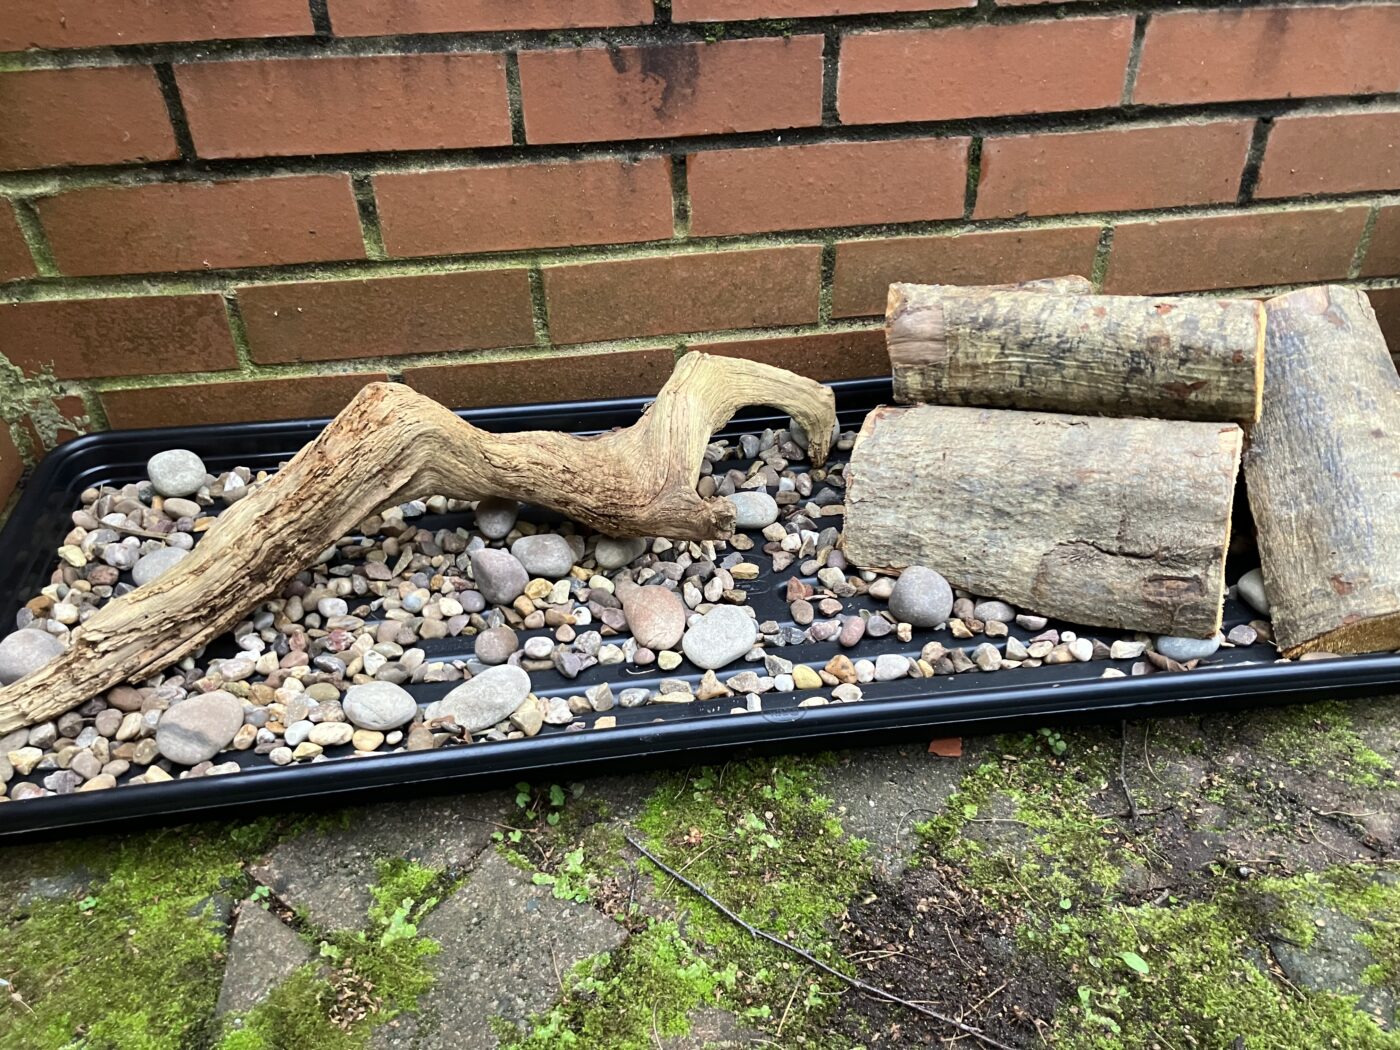 A tray with gravel and logs in